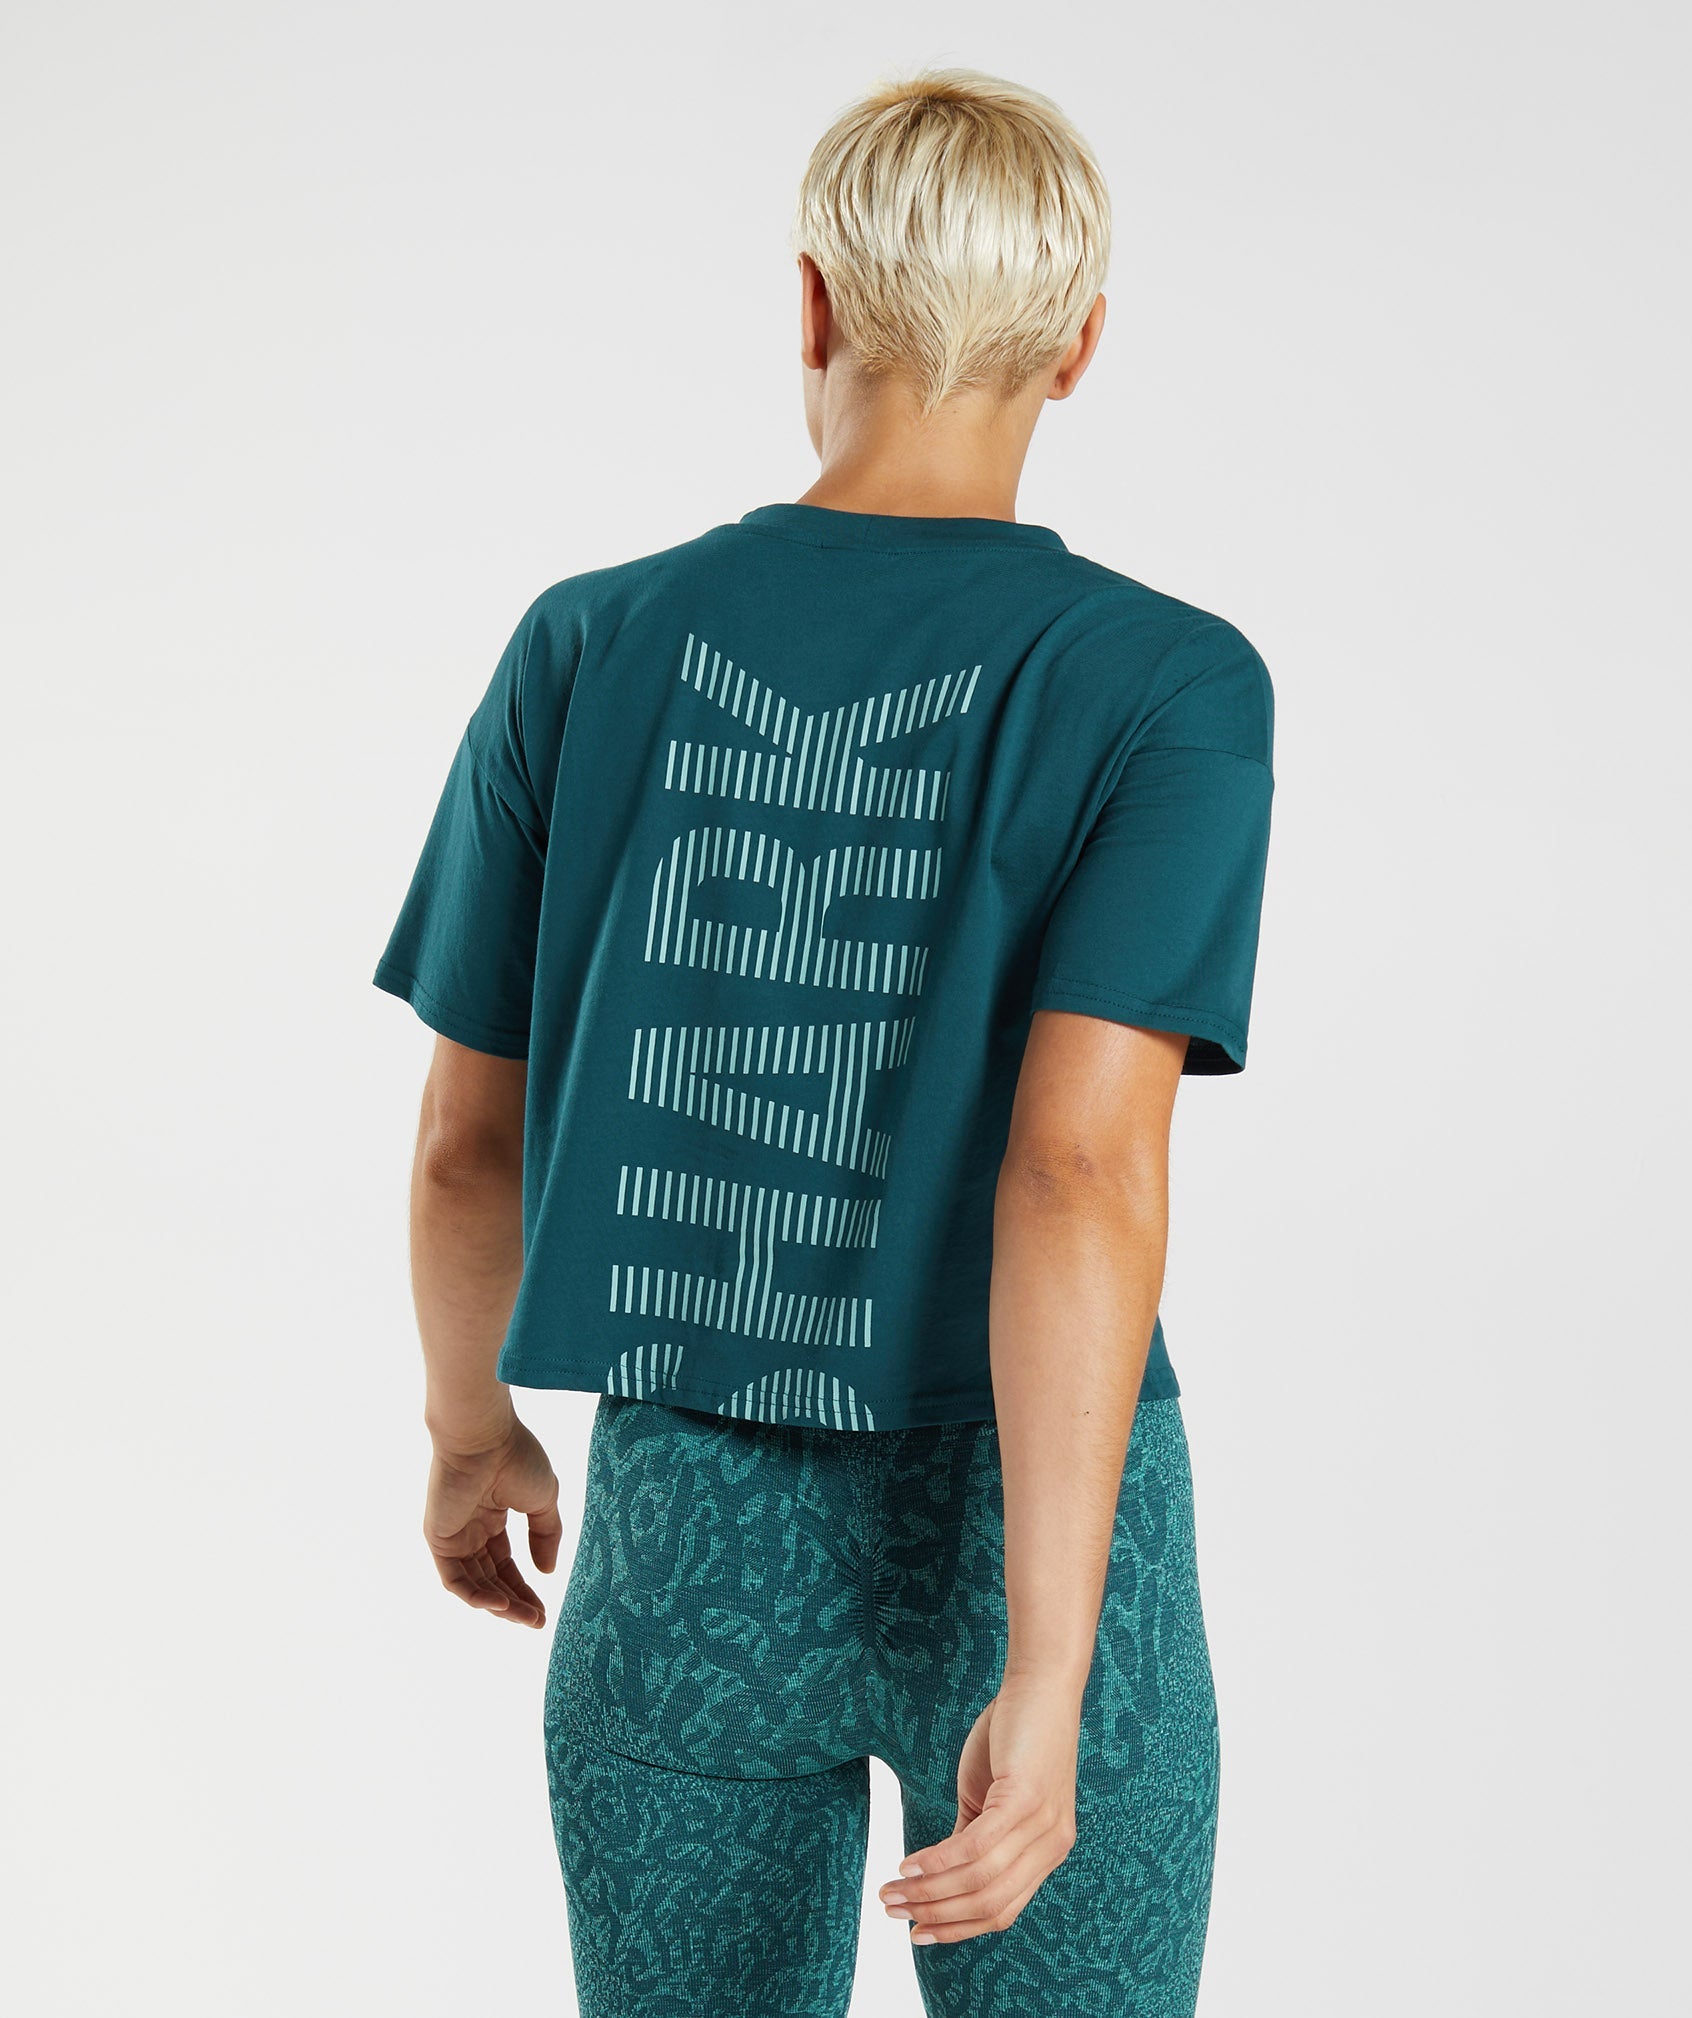 315 Midi T-Shirt in Winter Teal/Pearl Blue - view 2